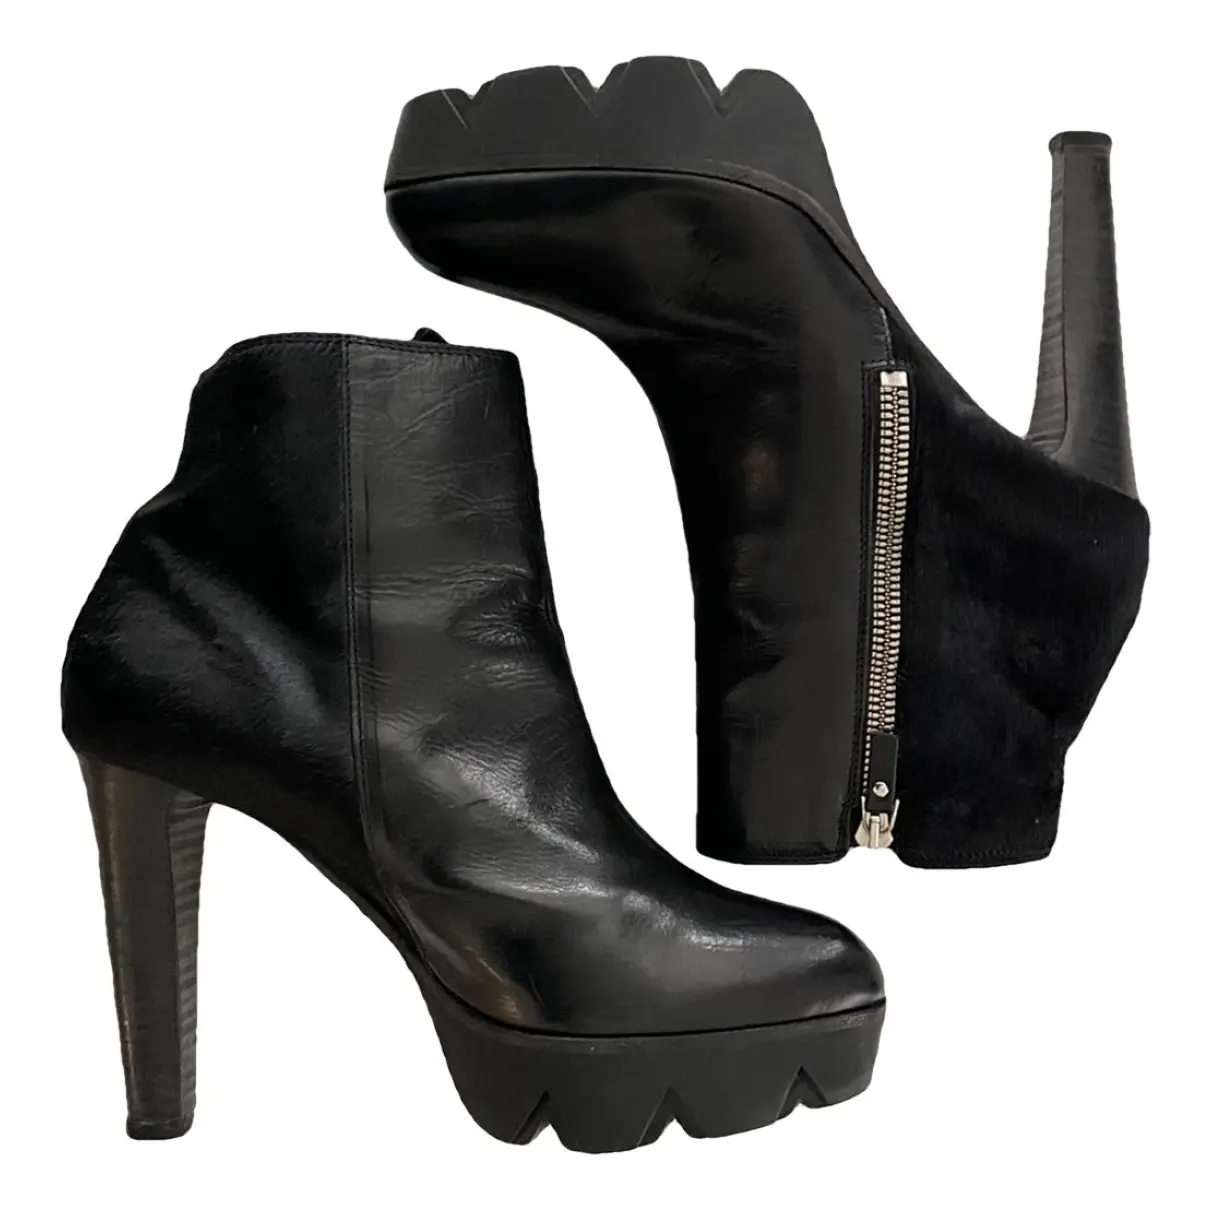 Pony-style calfskin ankle boots